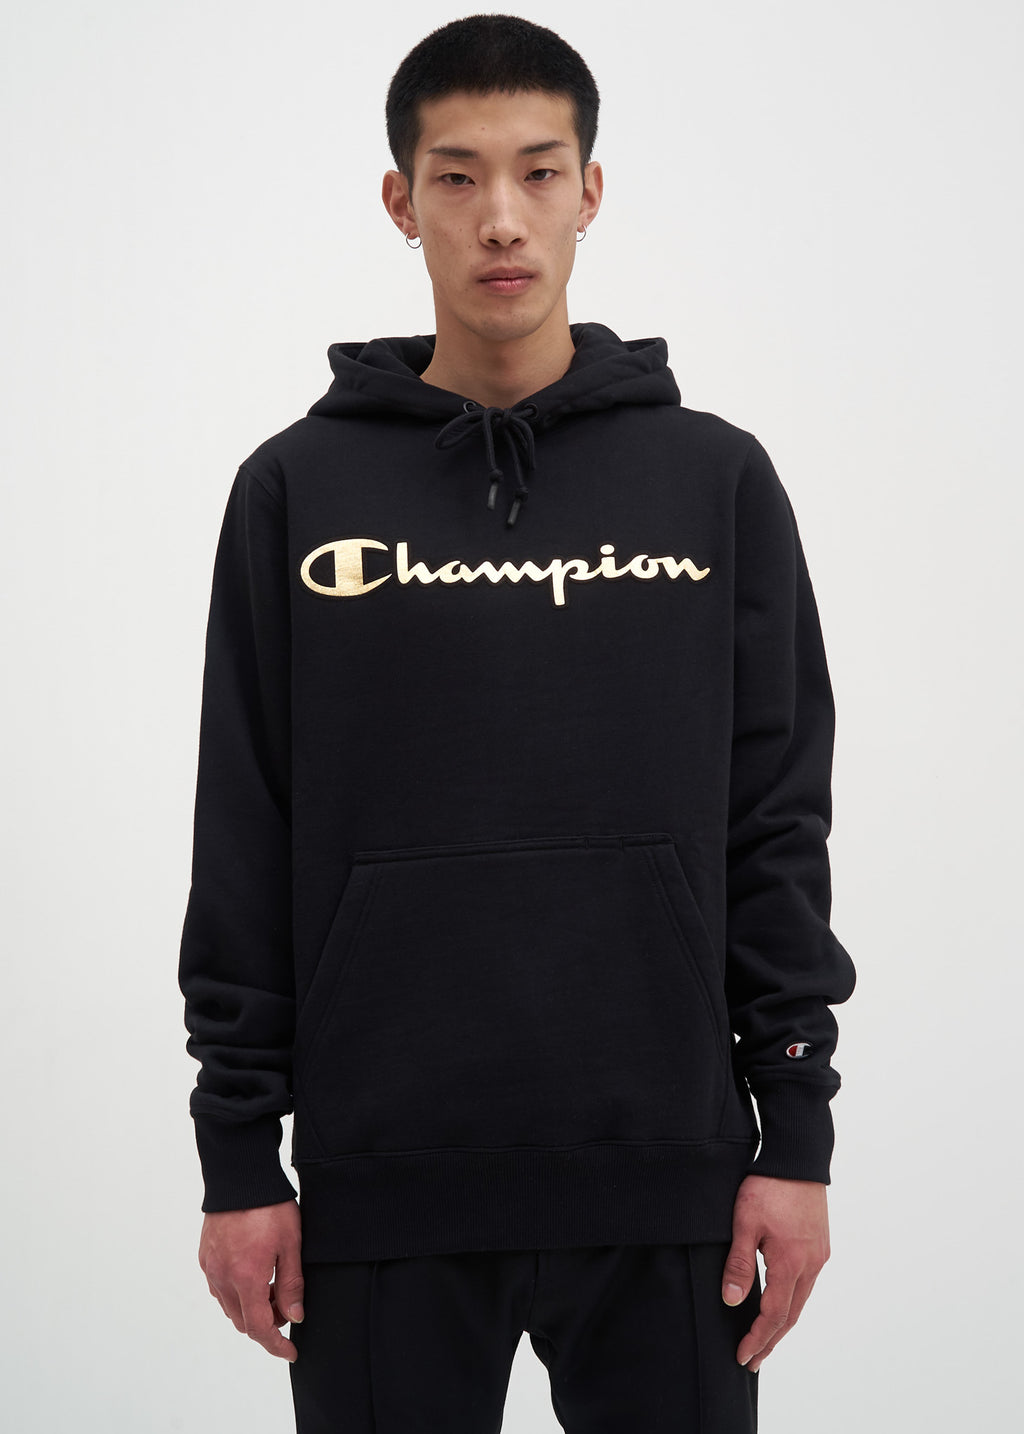 black champion hoodie with gold writing 